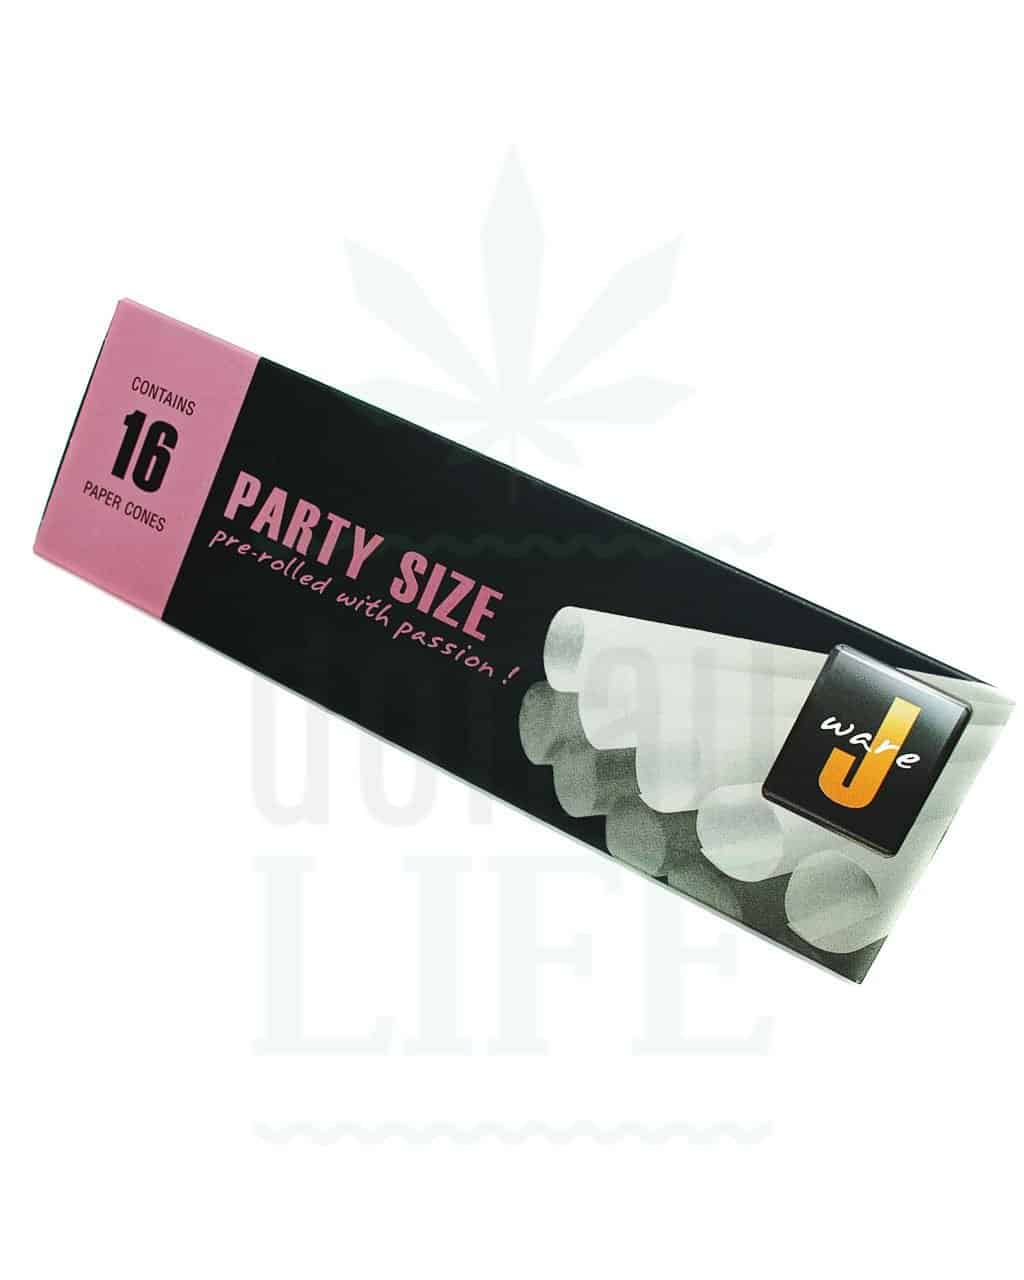 Papers JWARE Cones Party Size | 16 pieces